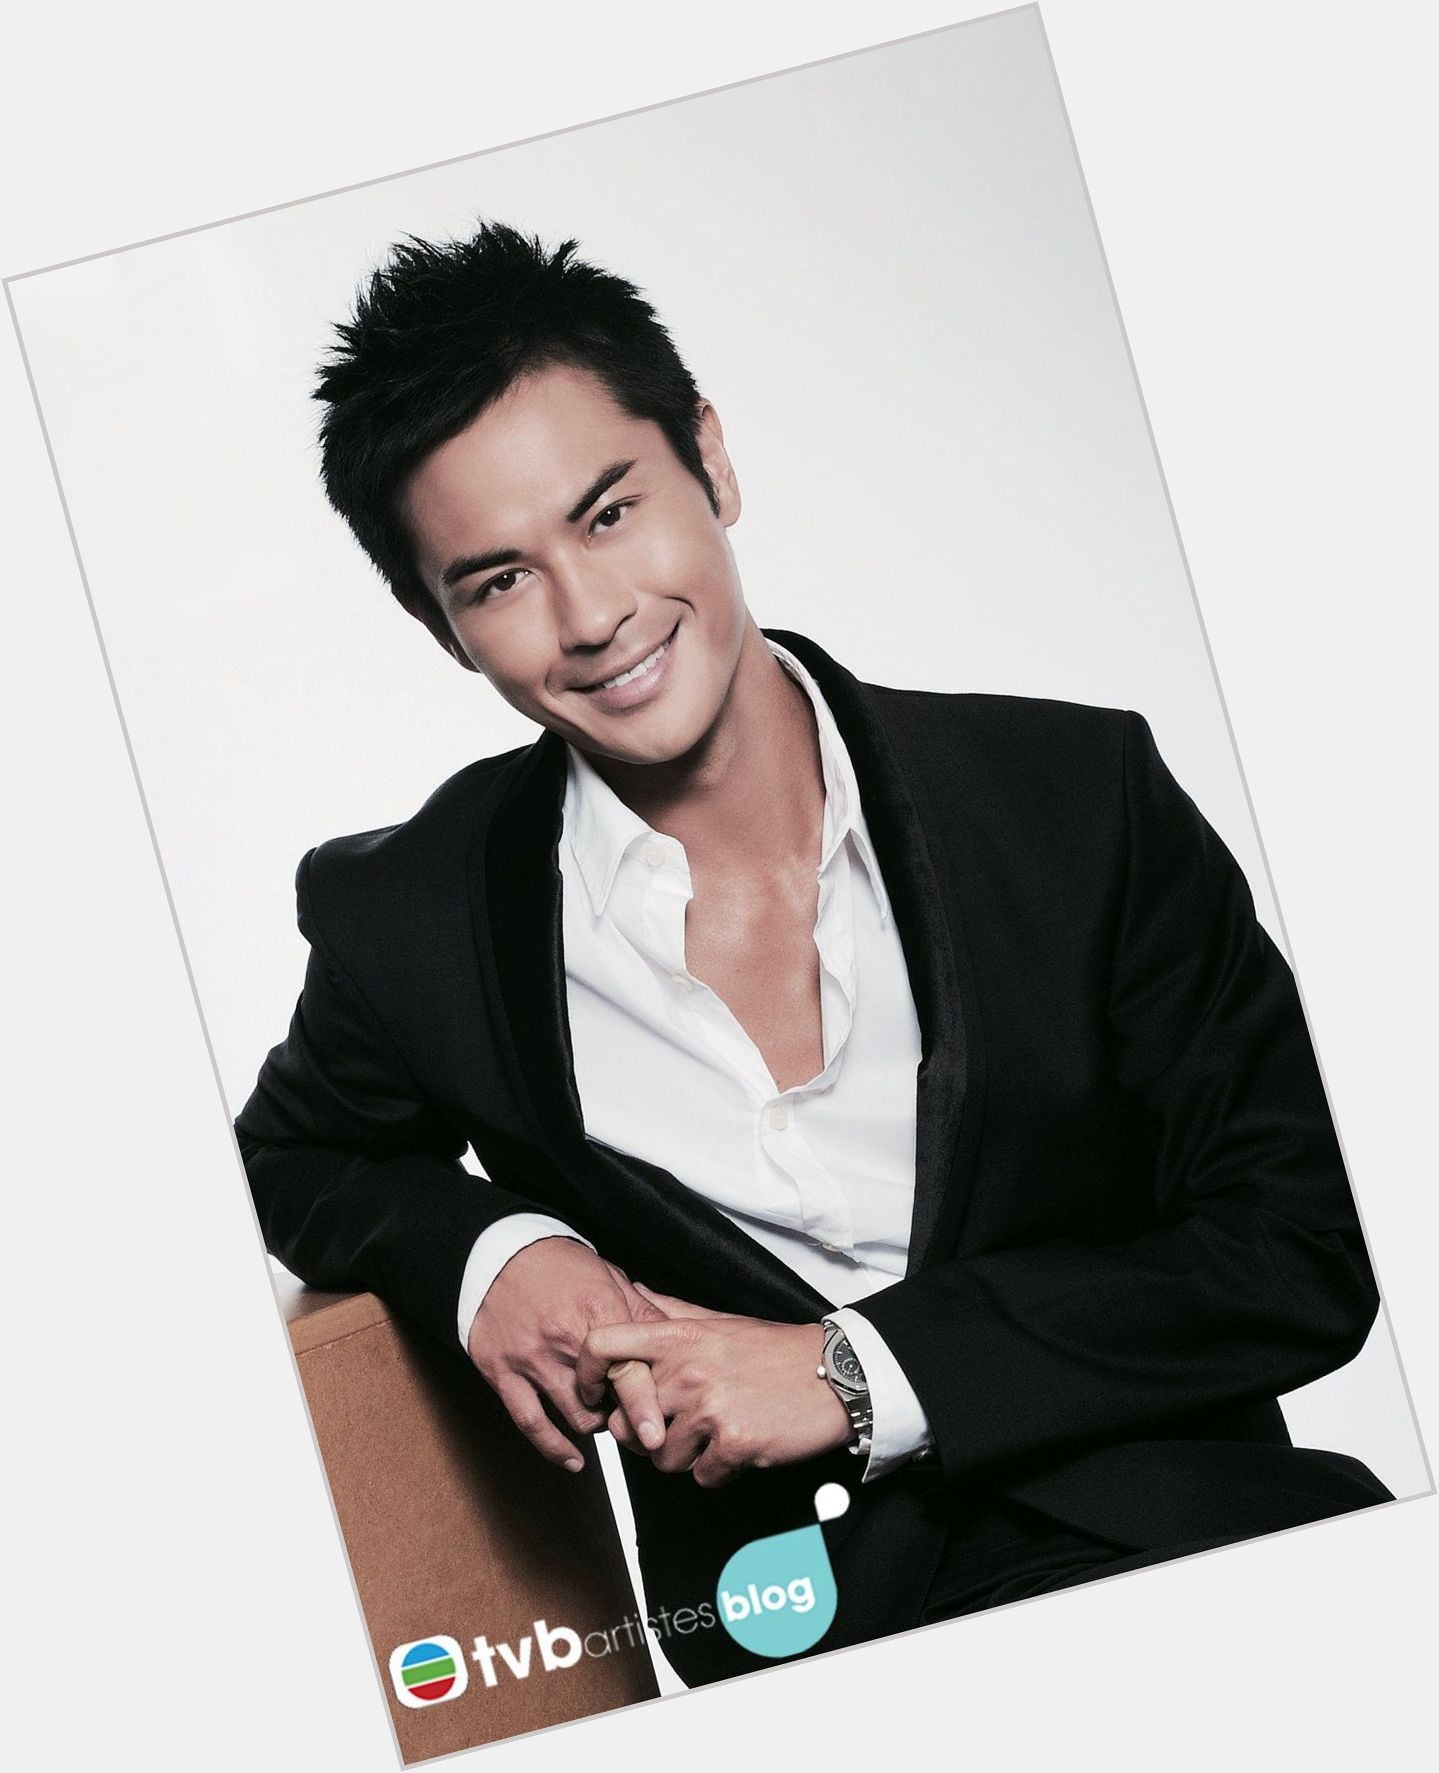 <a href="/hot-men/kevin-cheng/where-dating-news-photos">Kevin Cheng</a>  